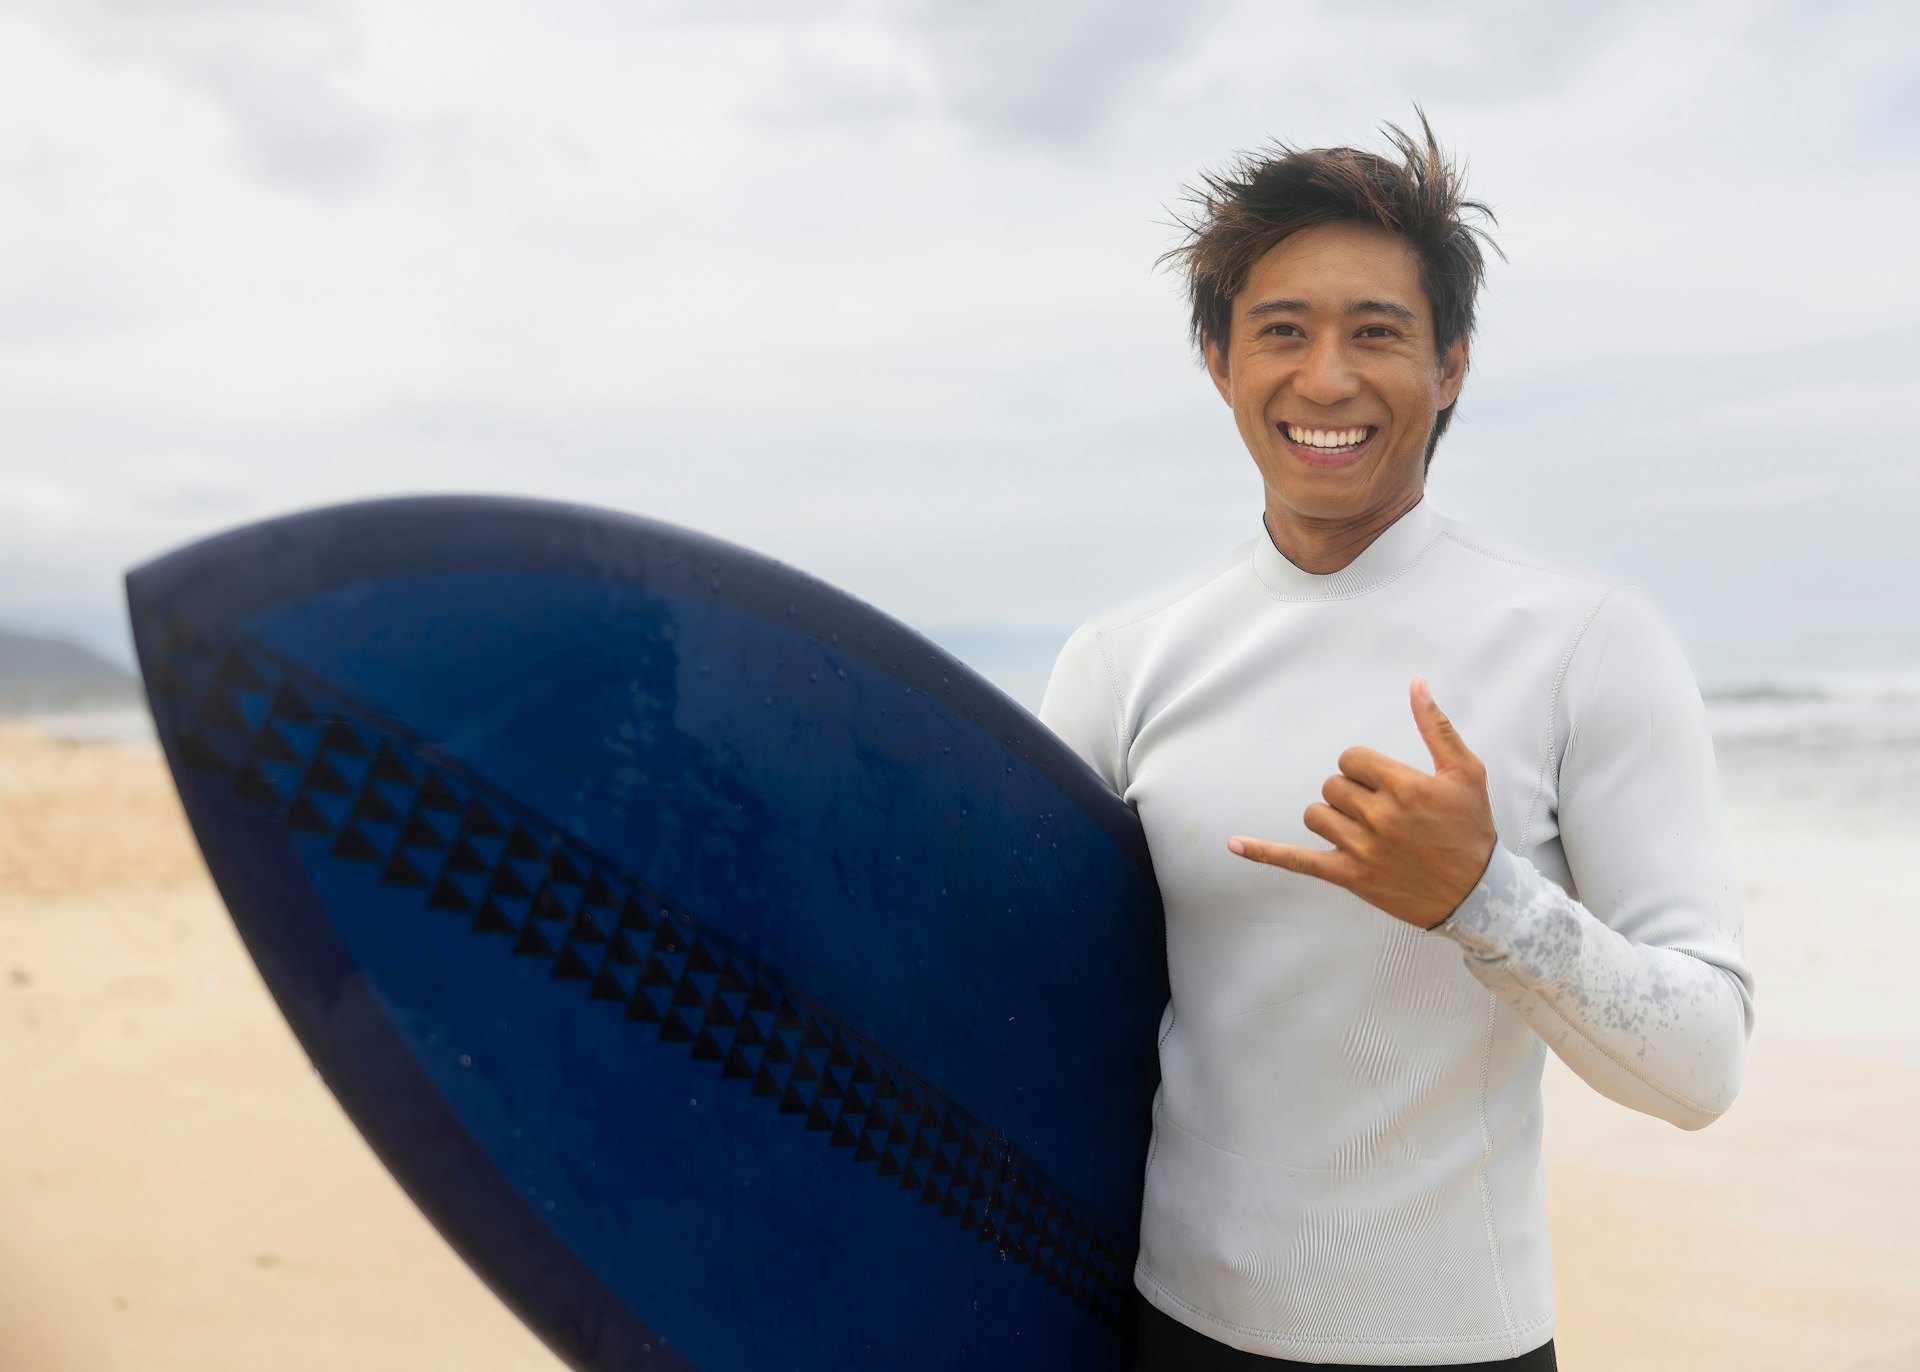 A smiling man on a beach is holding a surfboard while making the "shaka"hand gesture